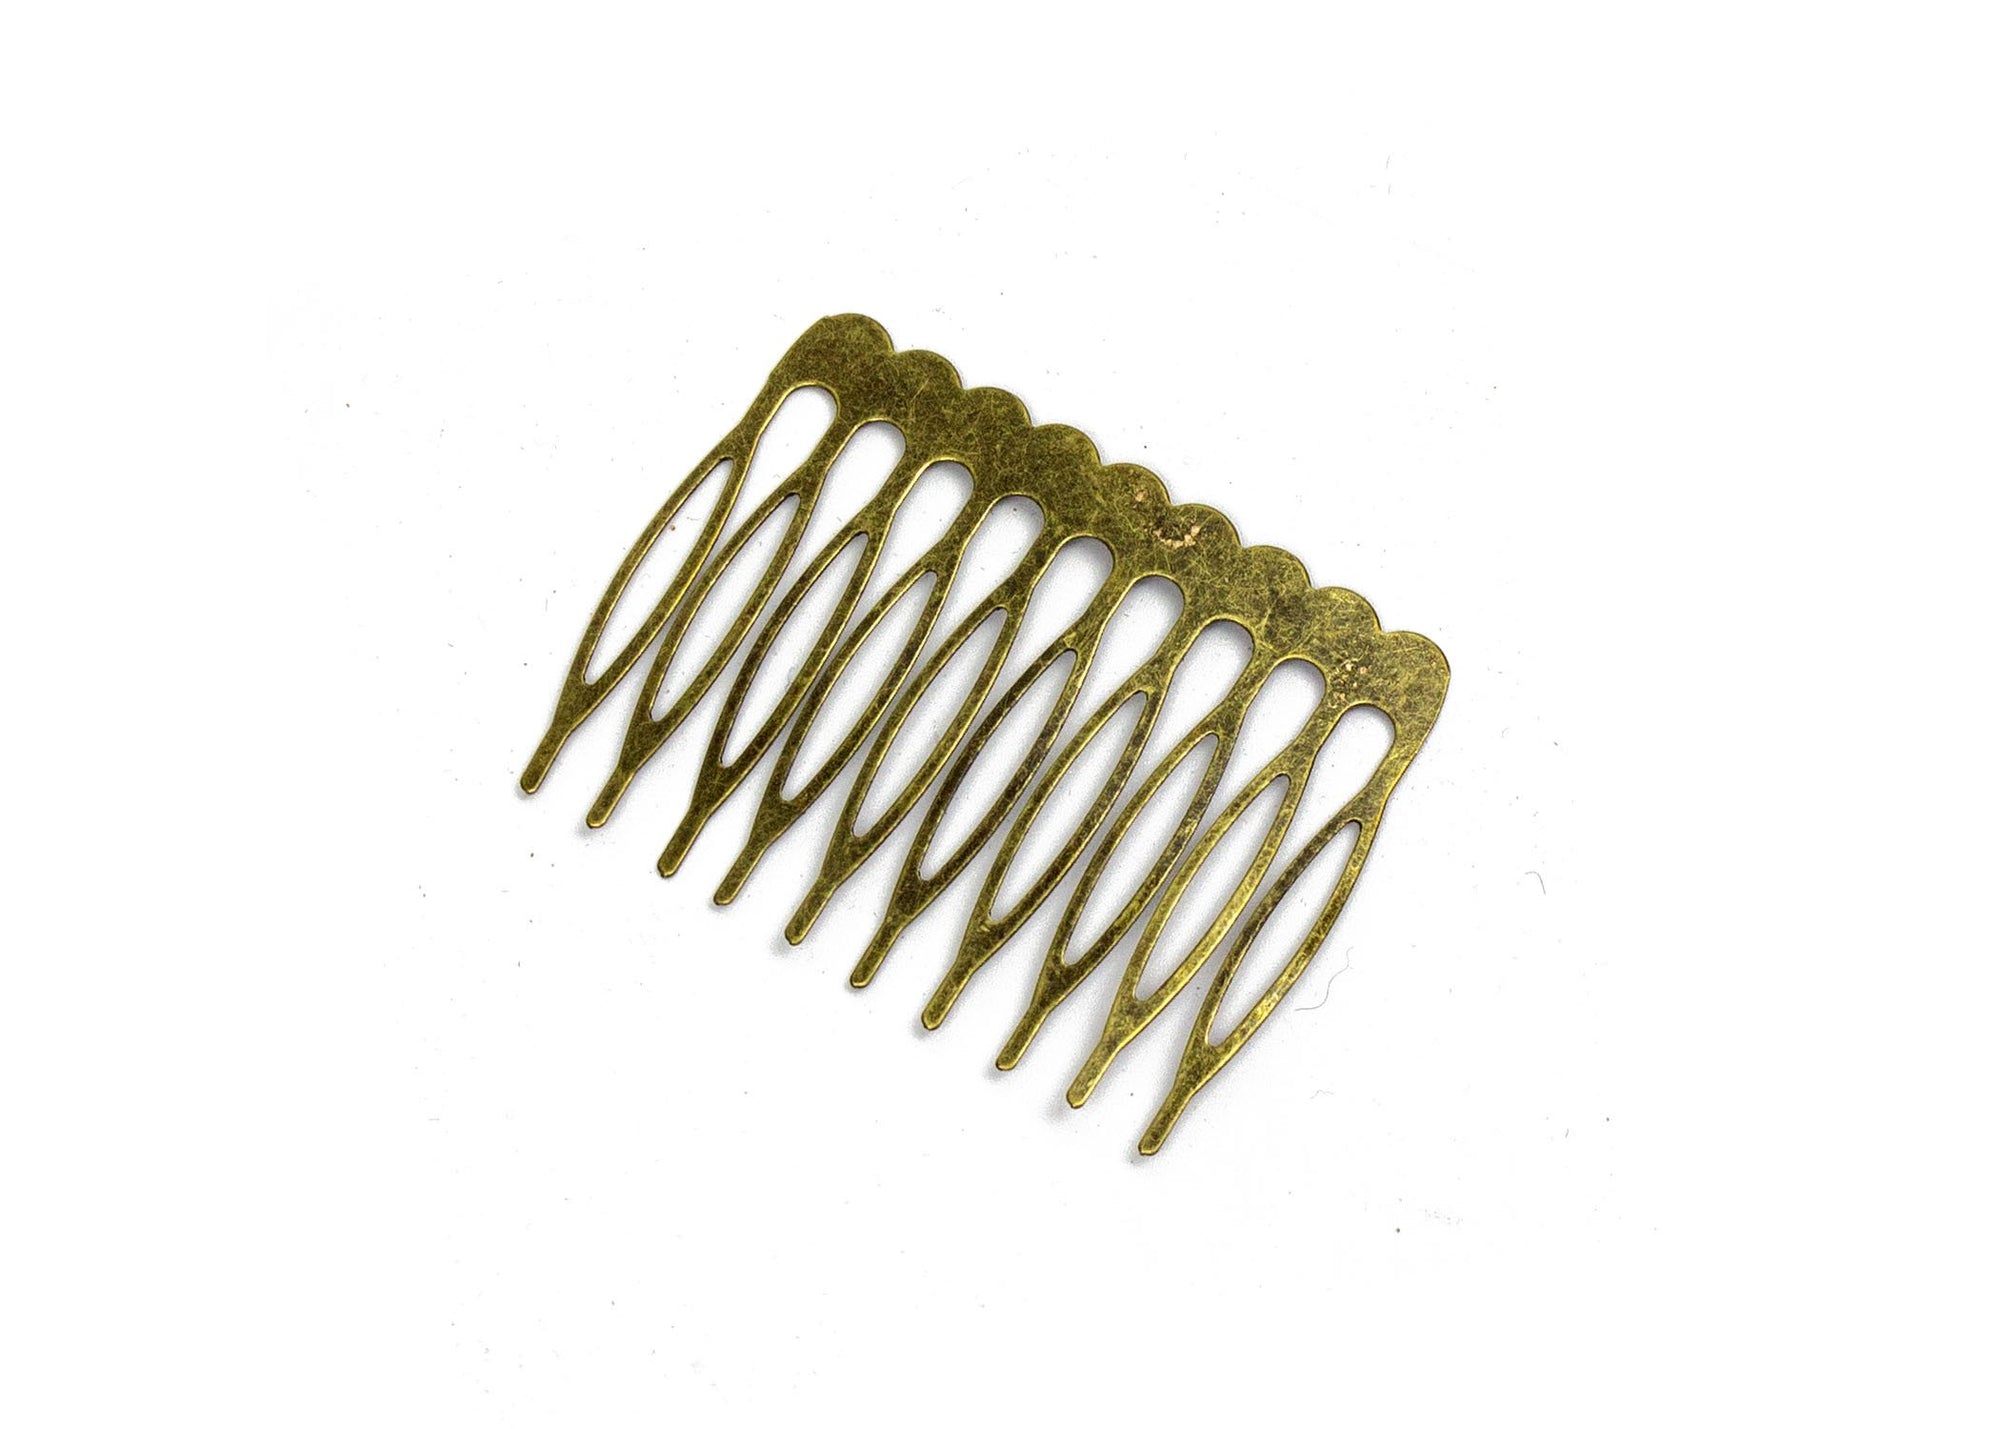 Metal Millinery or Veil Hair Comb 2" Wide - 10 Pieces - Humboldt Haberdashery